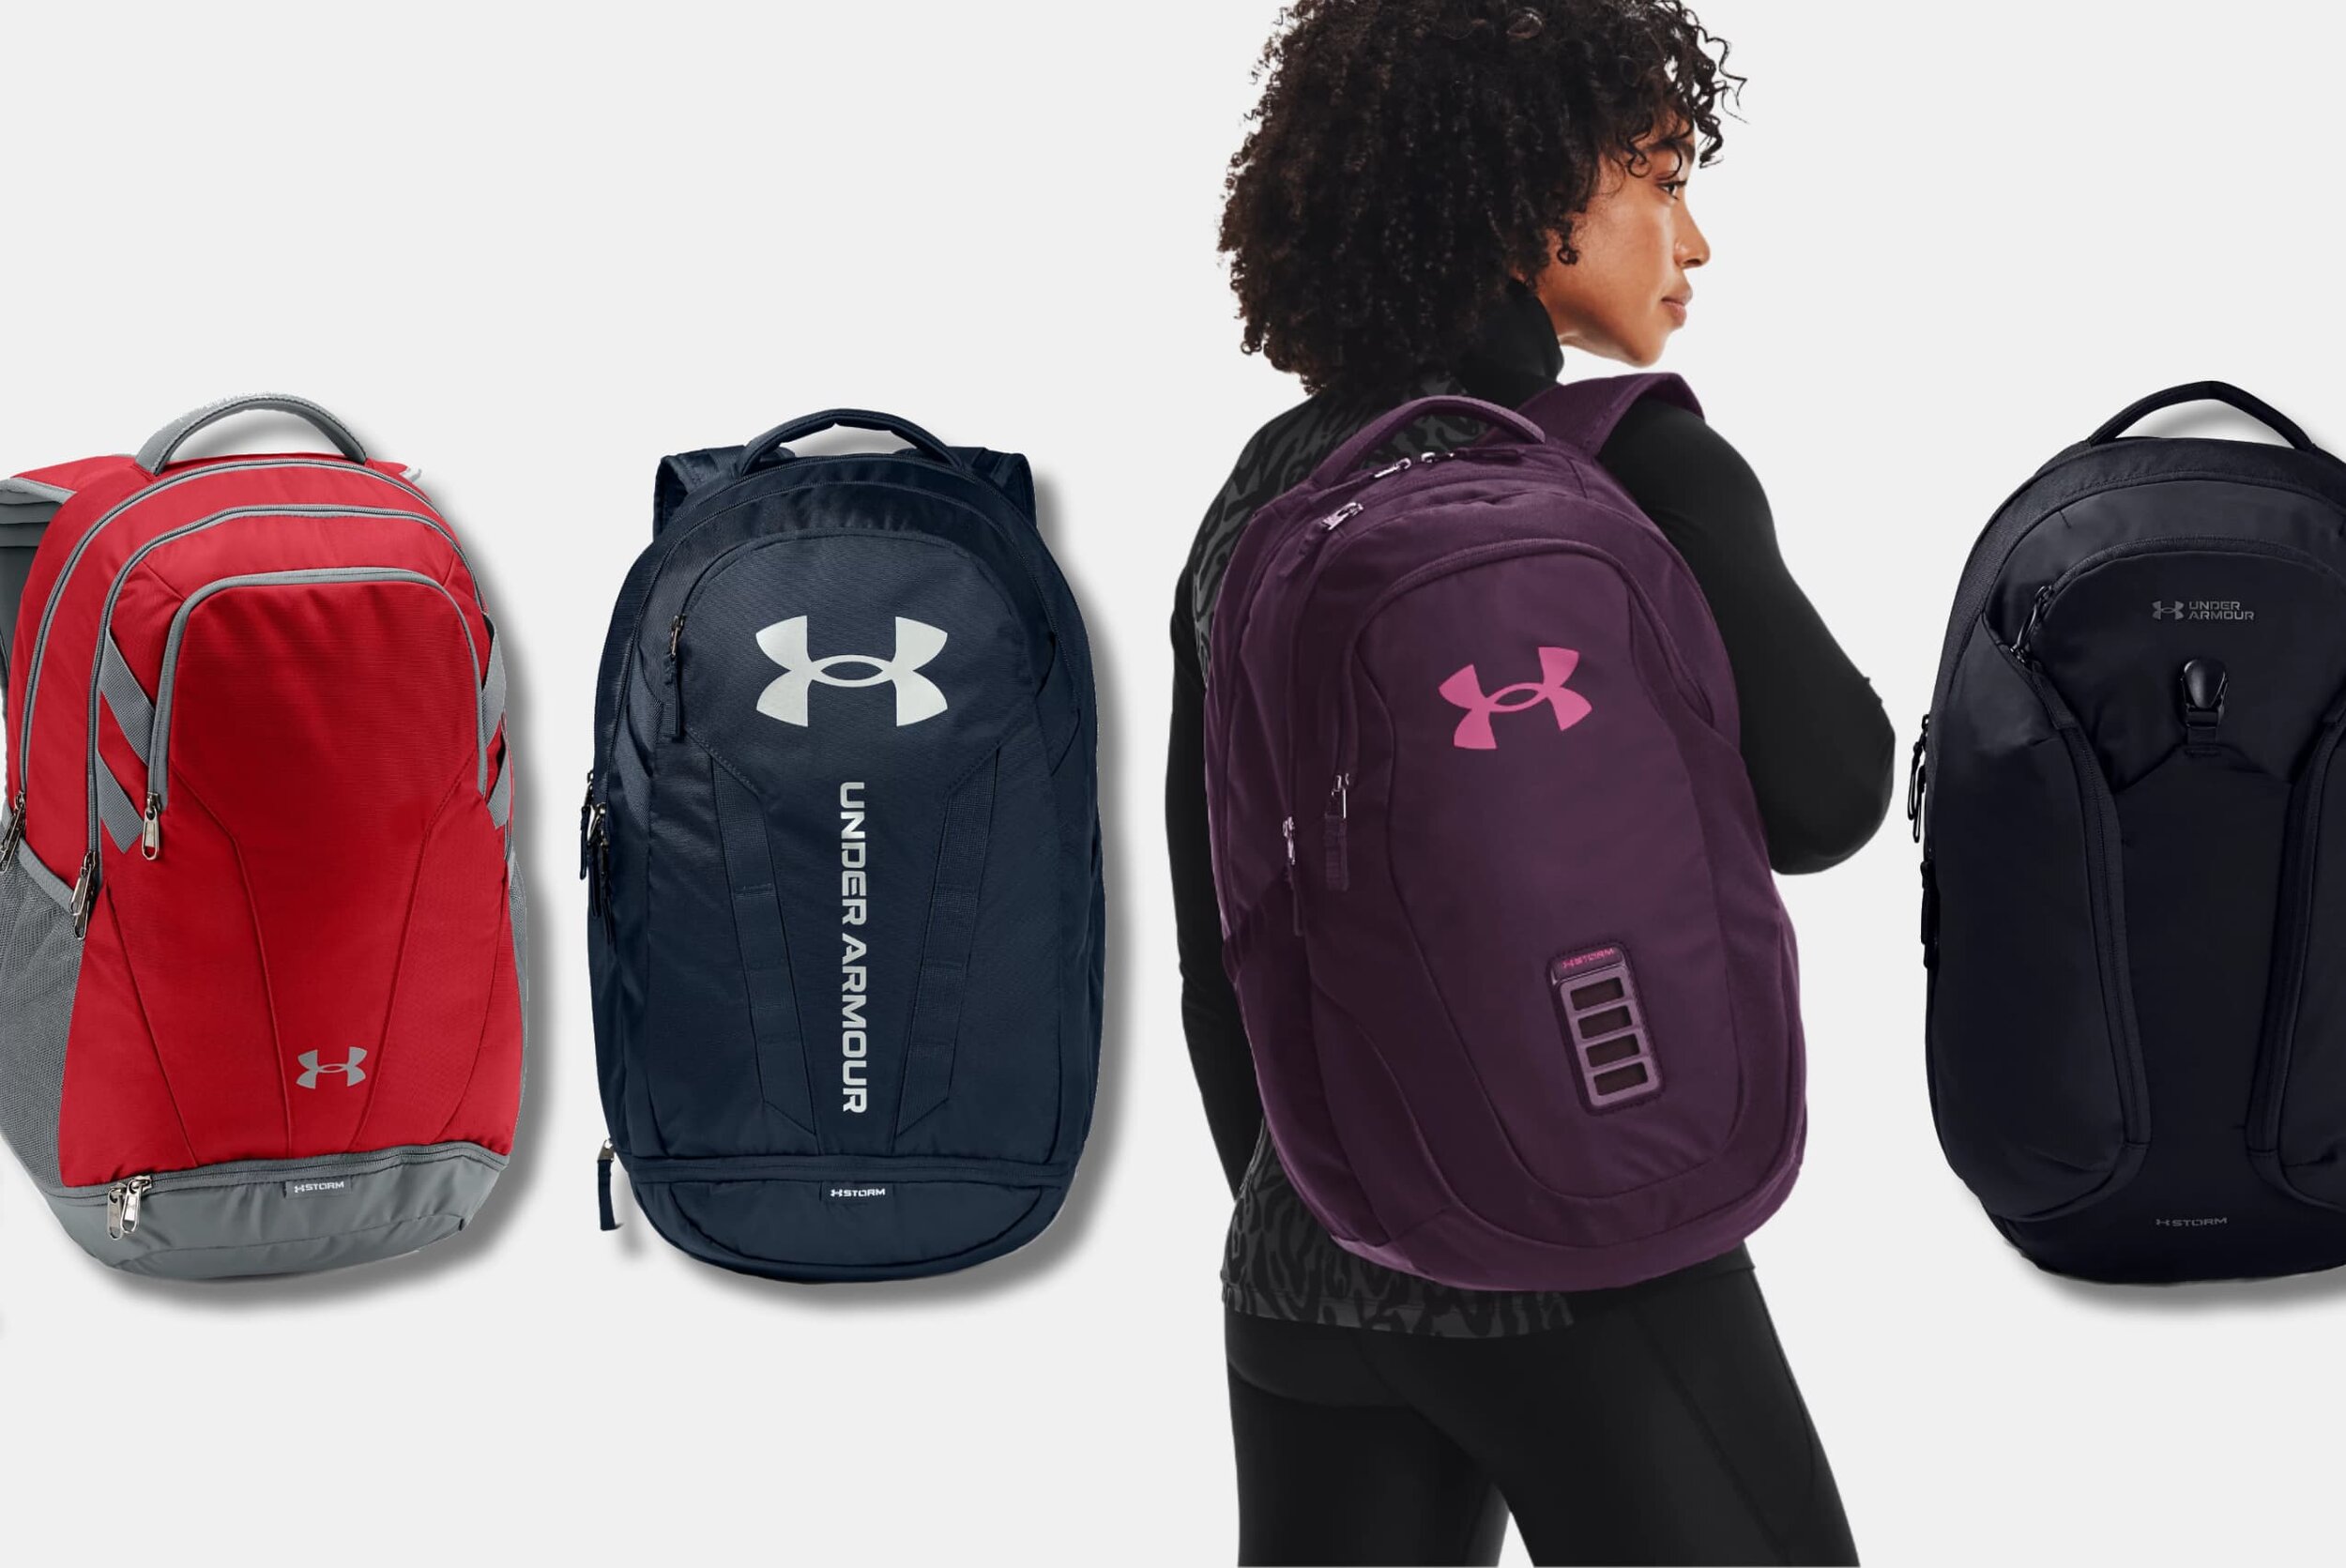 Under Armour Hustle 3.0 Team Backpack School Bag NEW Authentic 